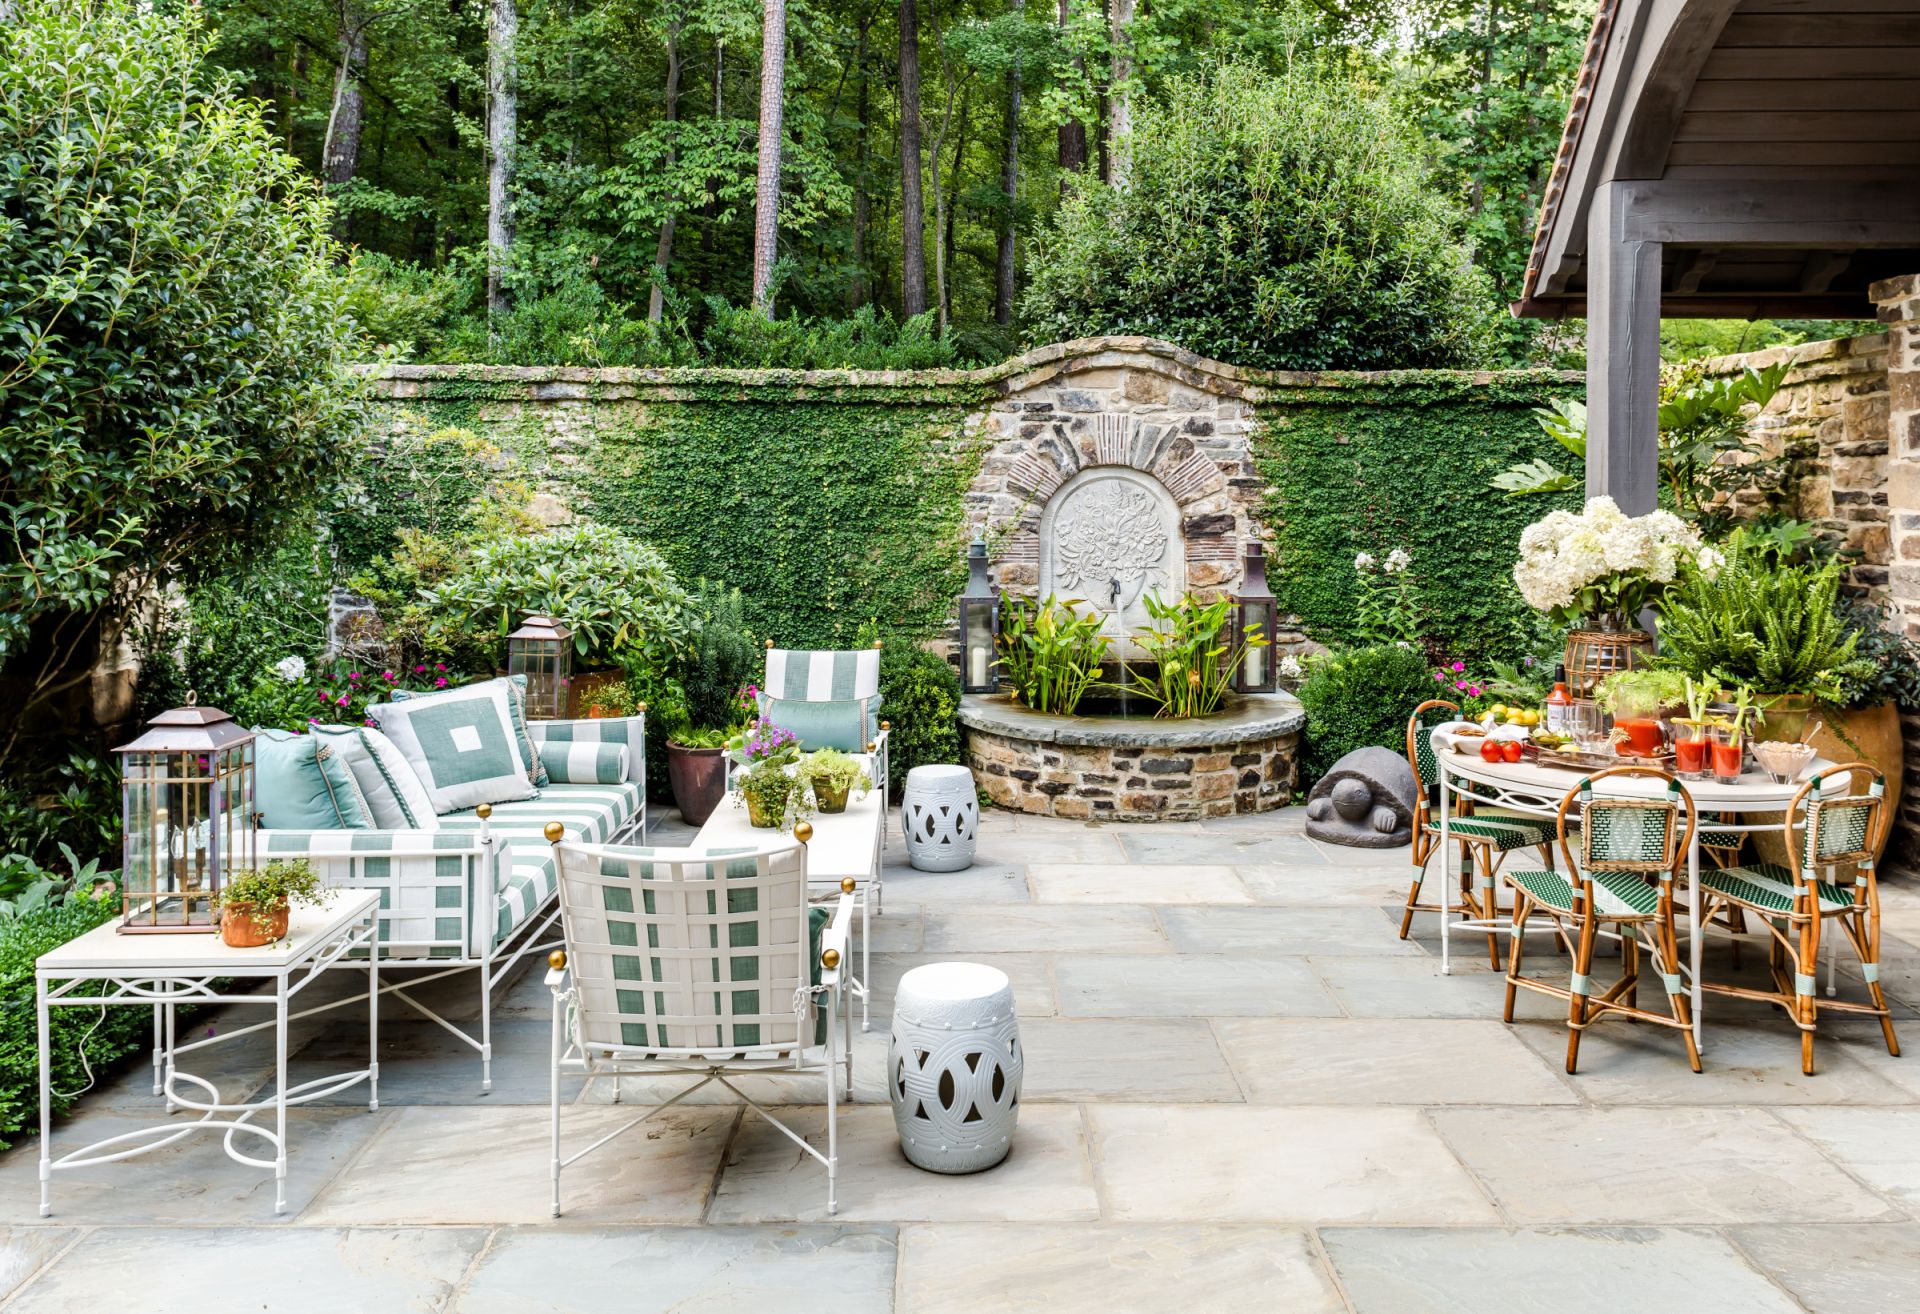 Outdoor living room ideas – 31 ways to create space to unwind